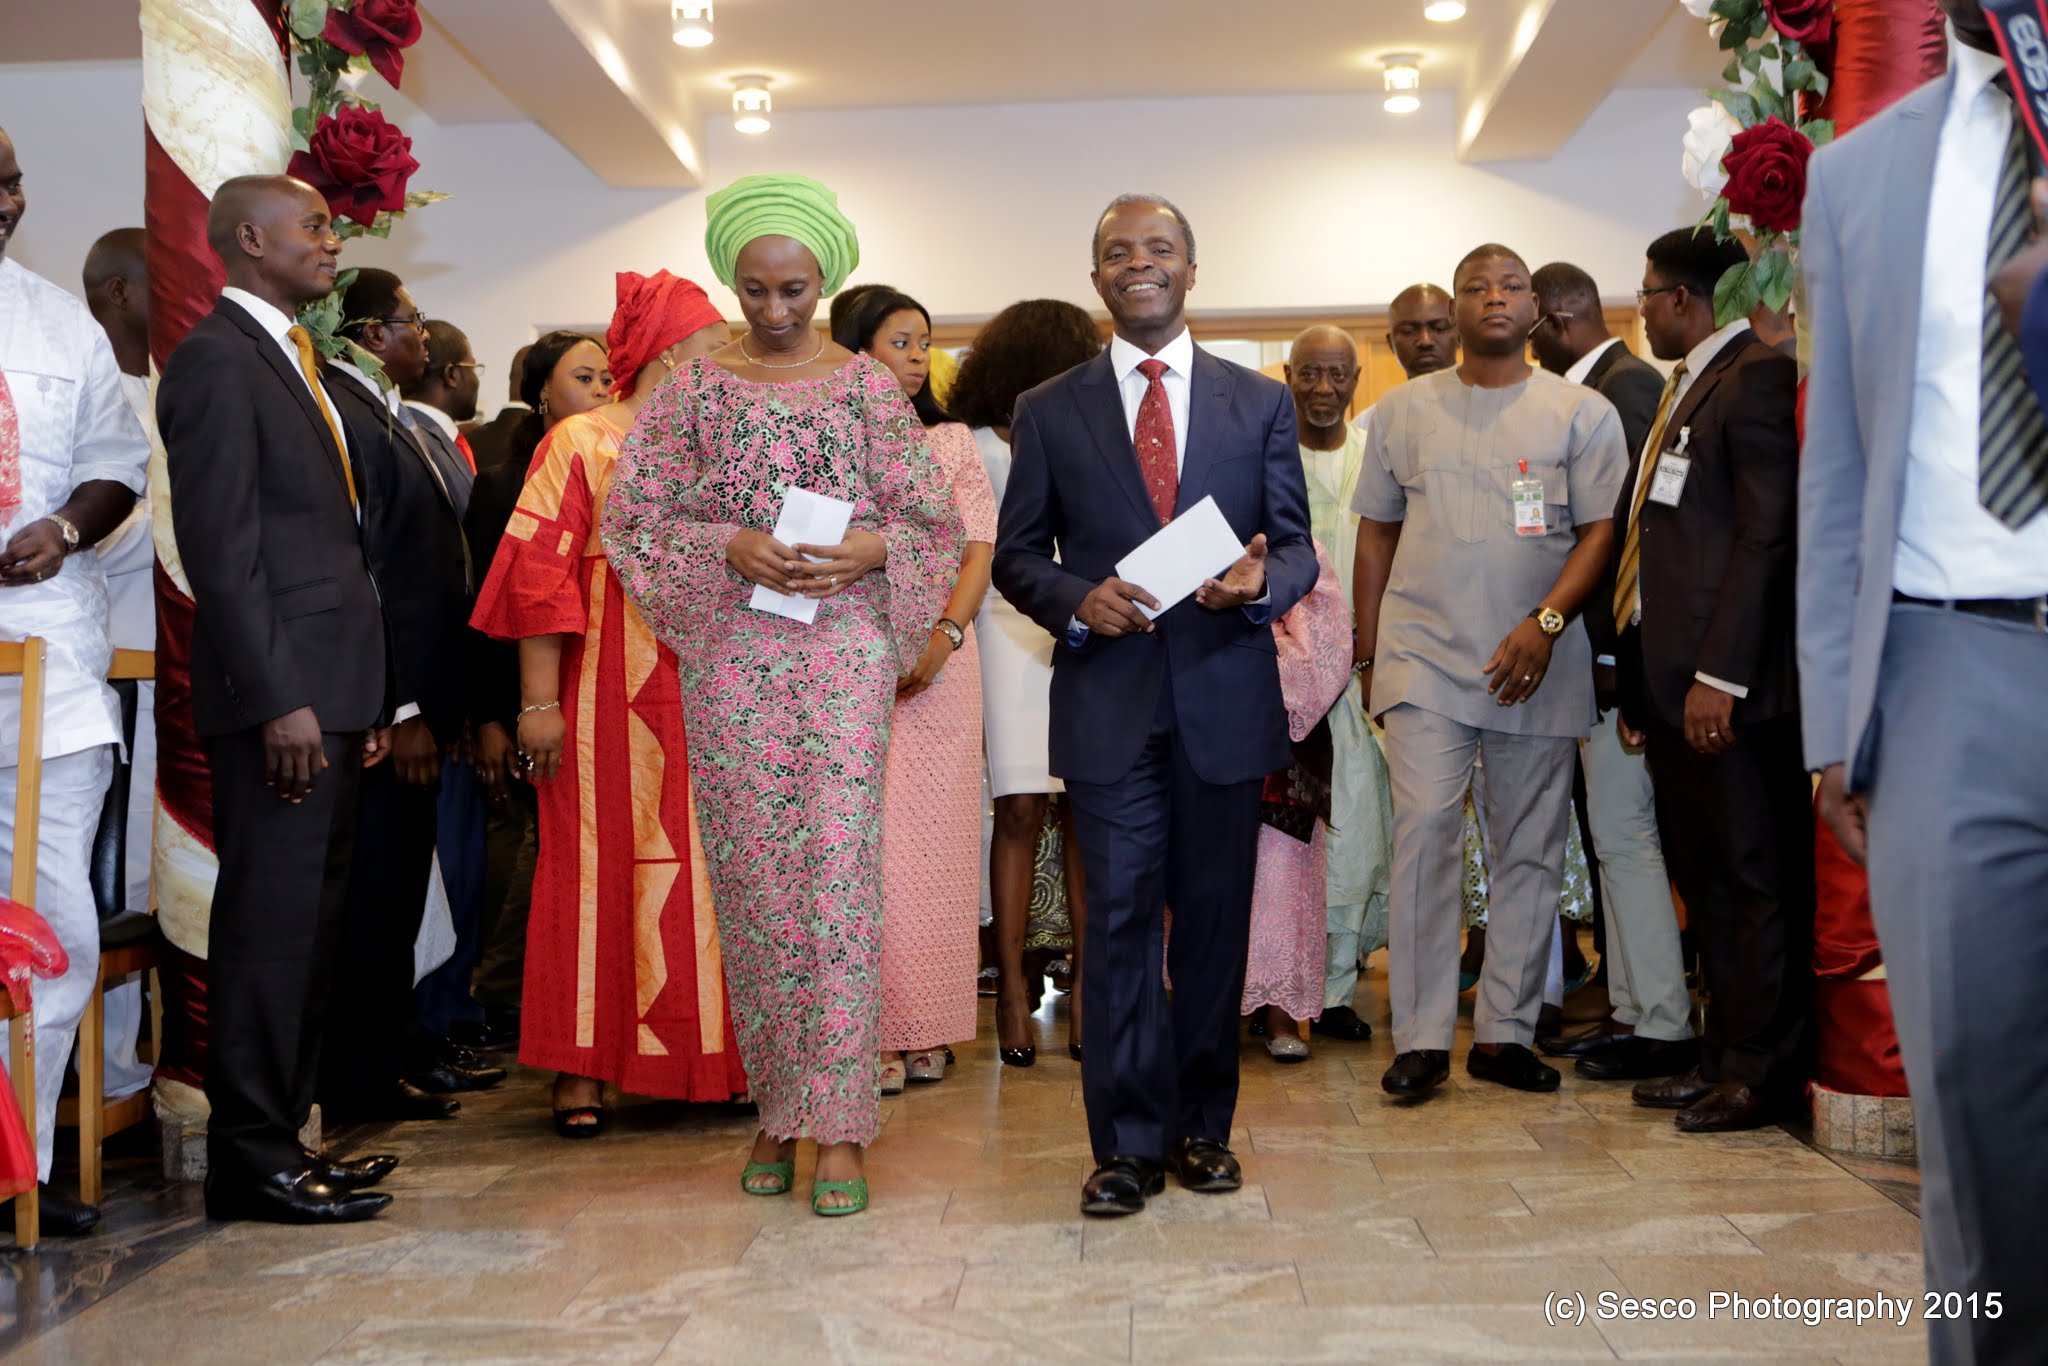 VP Osinbajo Attends The First Sunday Worship & Thanksgiving Service In Aso Rock Chapel On 31/05/2015